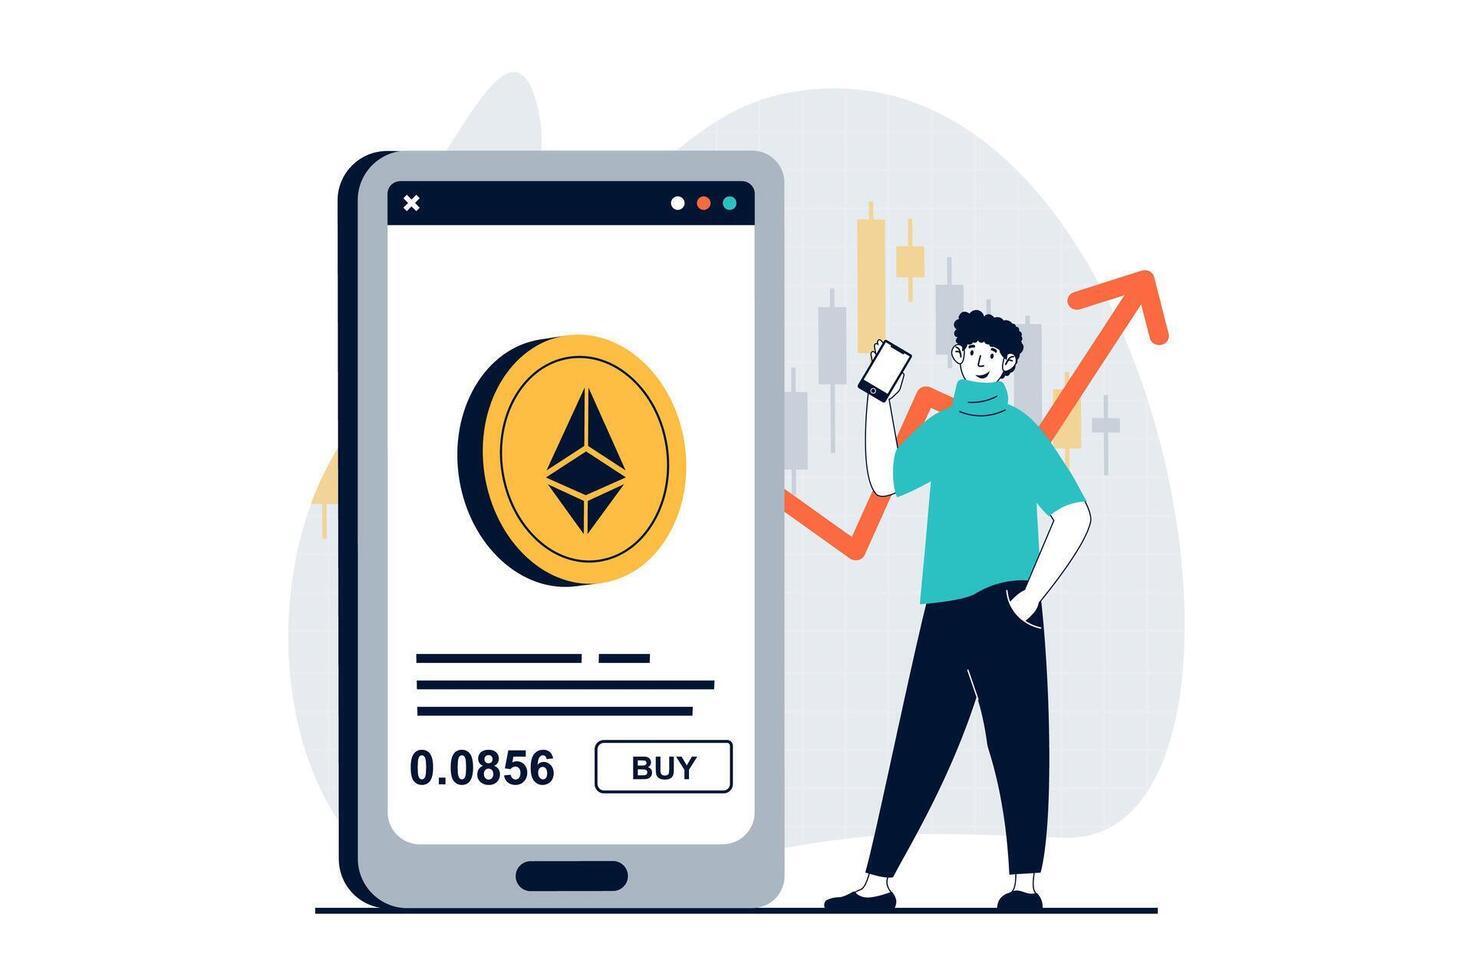 Cryptocurrency marketplace concept with people scene in flat design for web. Man buying ethereum coins and managing in banking app. Vector illustration for social media banner, marketing material.